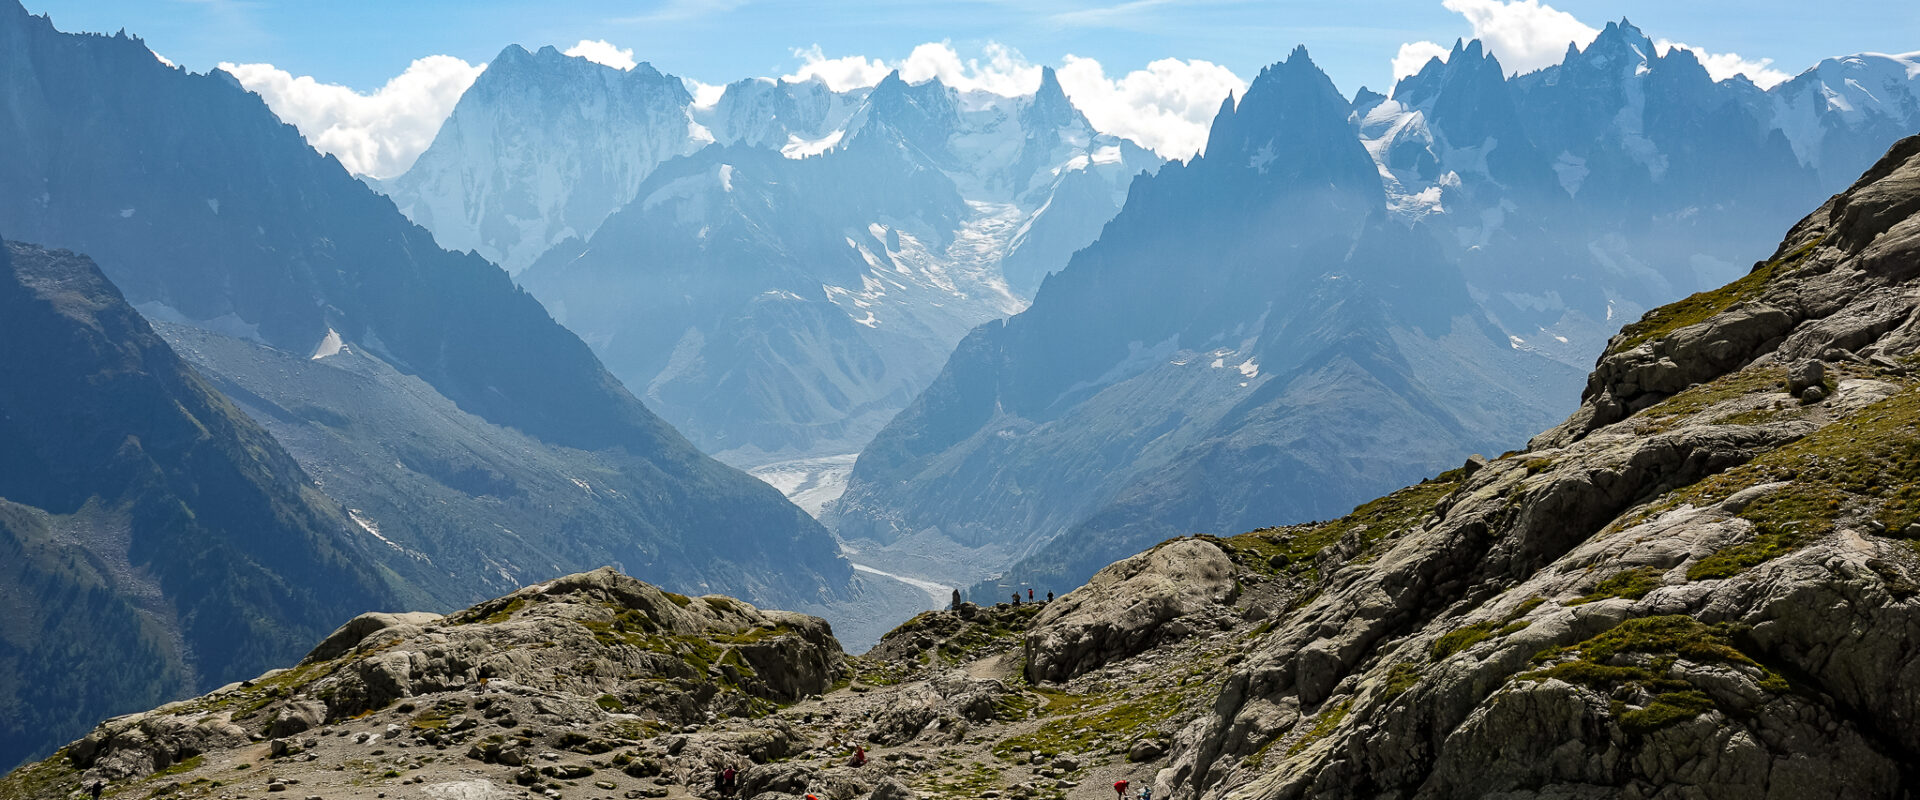 When is the Best Time to Hike the Tour du Mont Blanc?